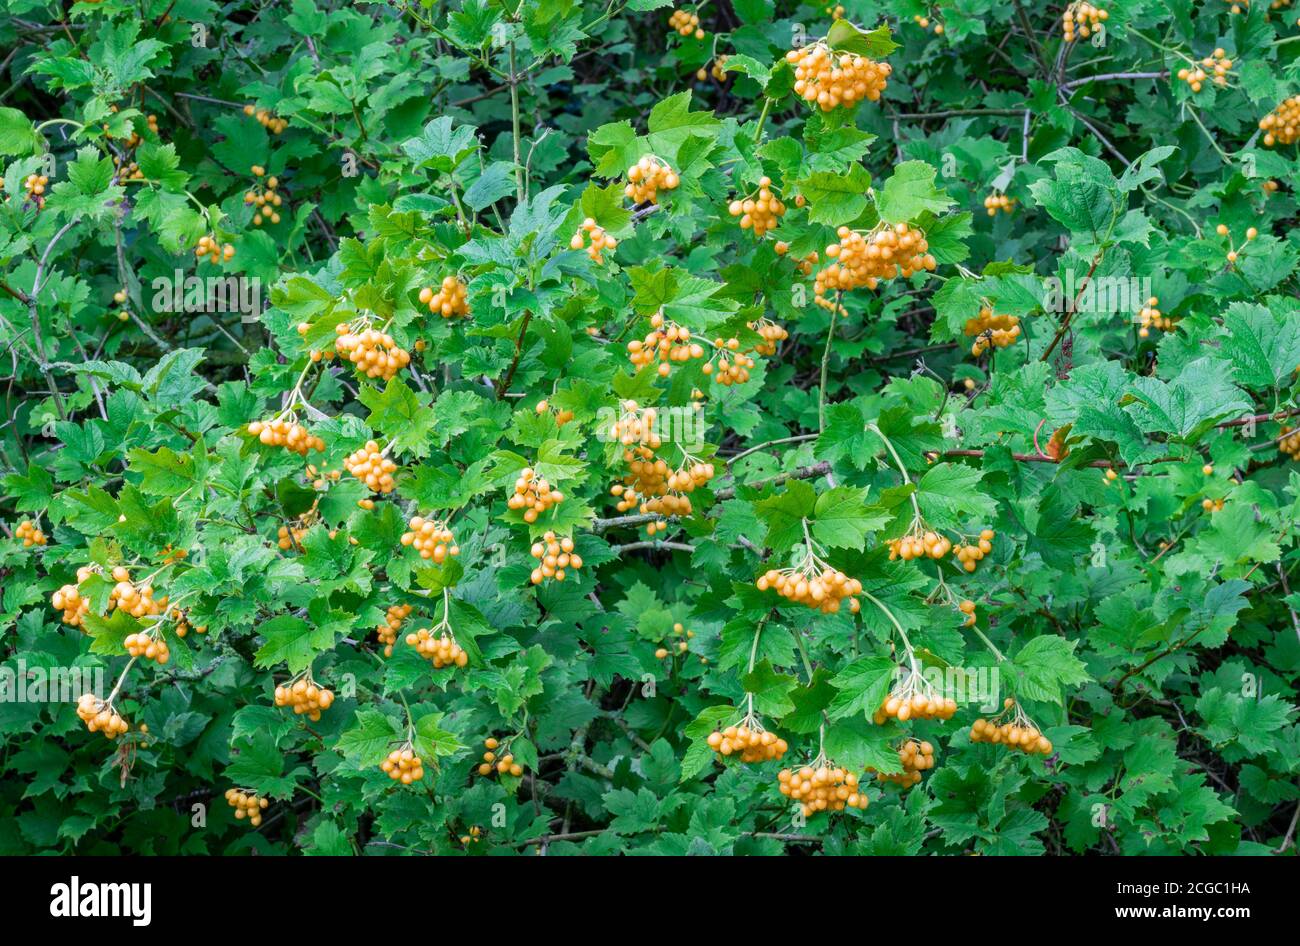 Groups of hanging yellow berries of the yellow-fruited Guelder Rose, Viburnum opulus 'Xanthocarpum', backed by green leaves in autumn. Stock Photo